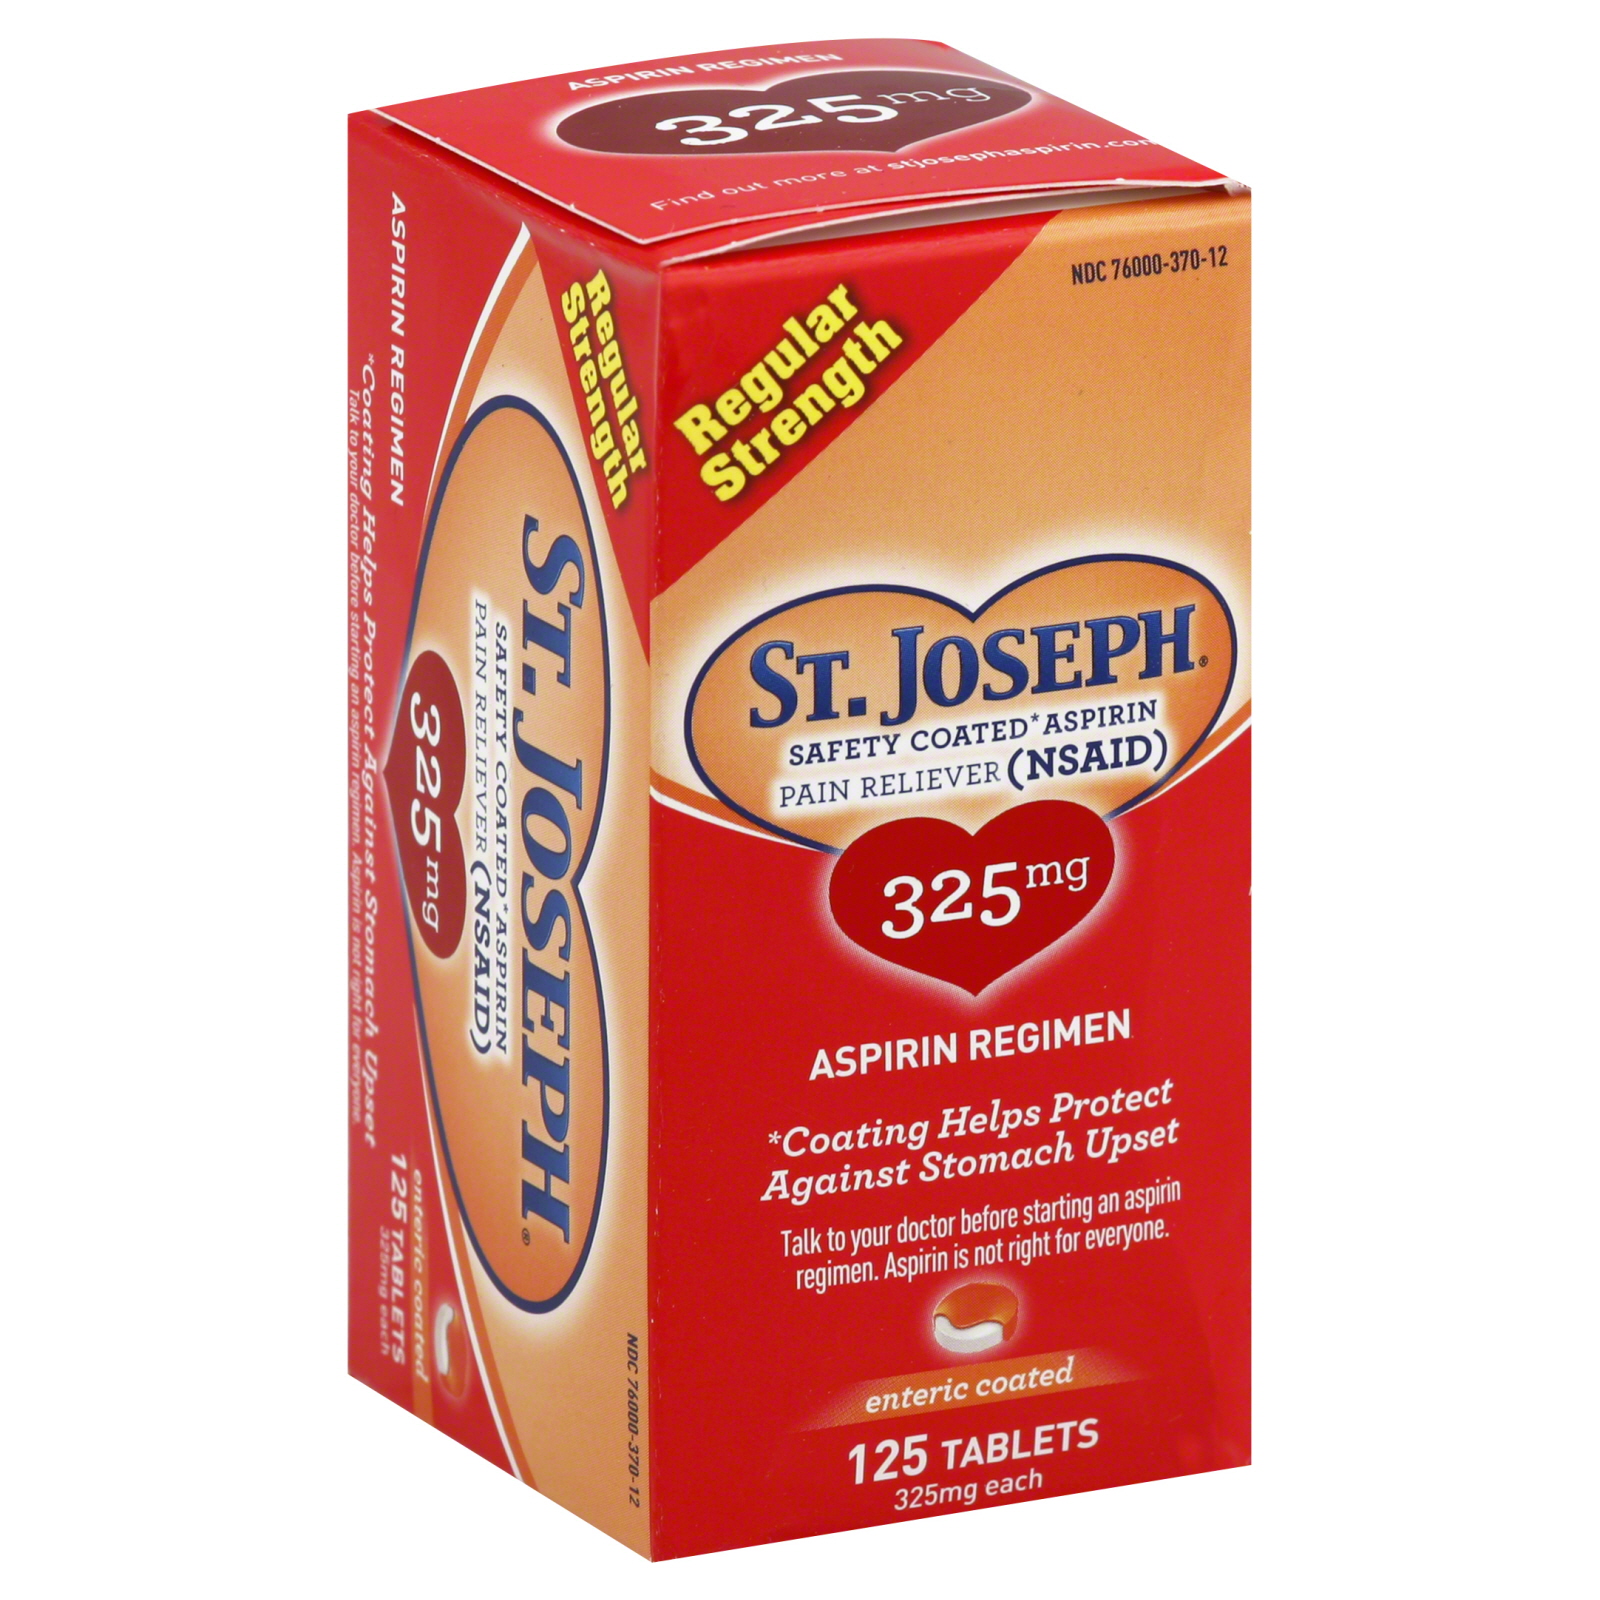 St. Joseph Safety Coated Aspirin Pain Reliver  325 mg